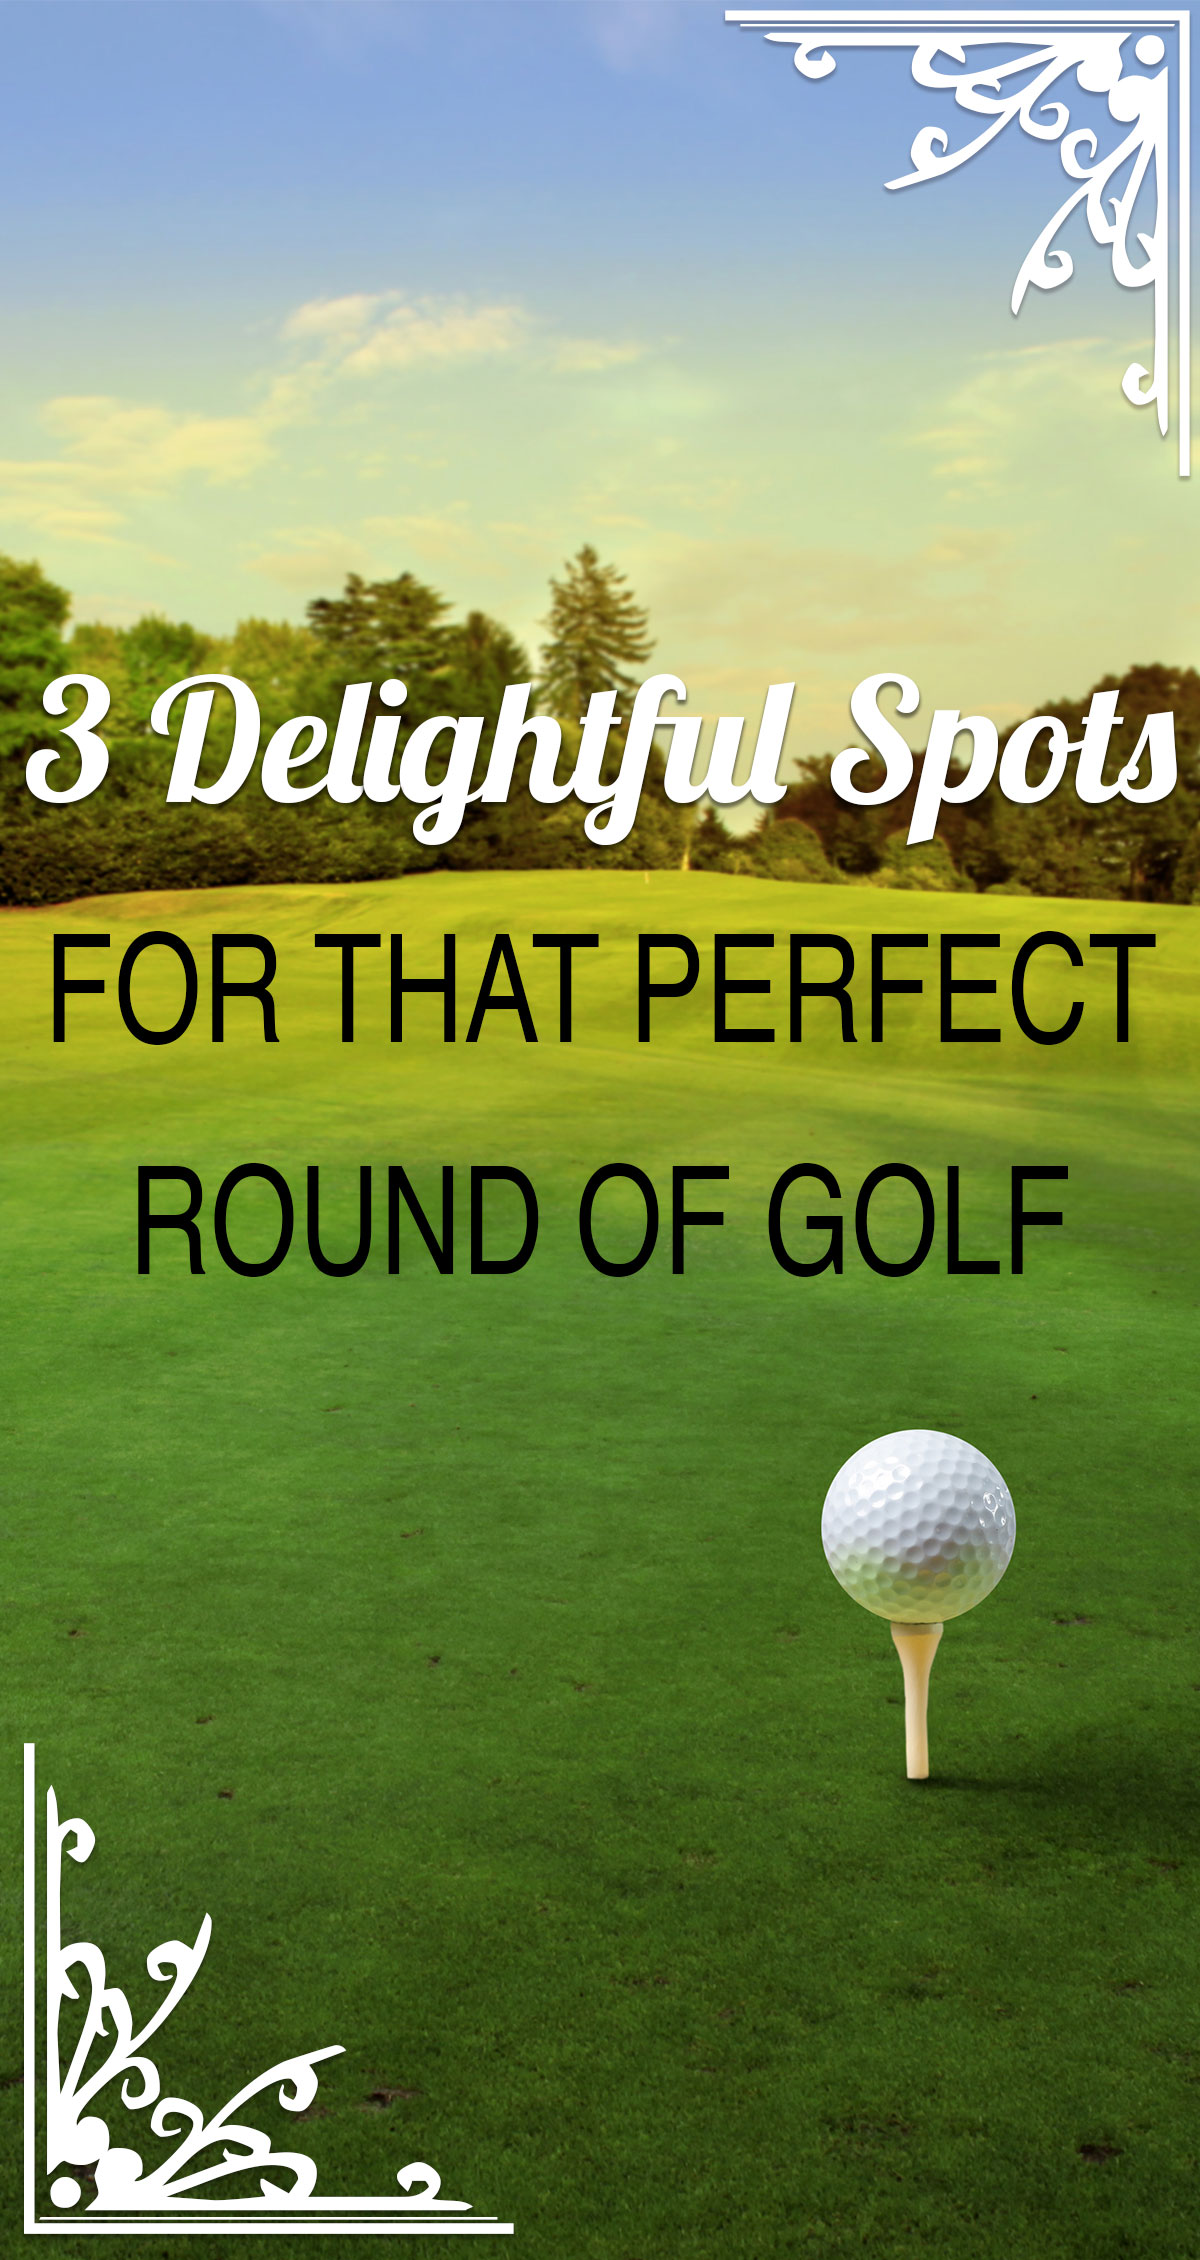 3 Delightful Spots For That Perfect Round of Golf Pin